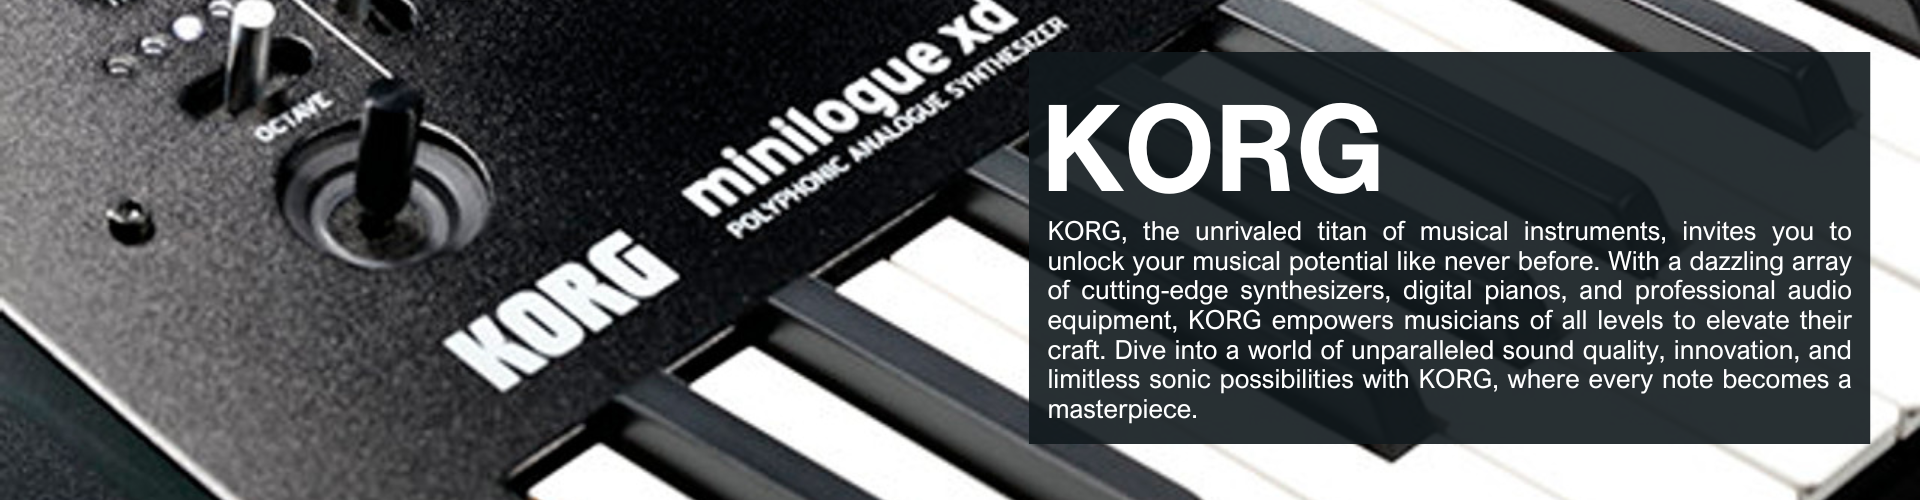 KORG, the unrivaled titan of musical instruments, invites you to unlock your musical potential like never before. With a dazzling array of cutting-edge synthesizers, digital pianos, and professional audio equipment, KORG empowers musicians of all levels to elevate their craft. Dive into a world of unparalleled sound quality, innovation, and limitless sonic possibilities with KORG, where every note becomes a masterpiece. 